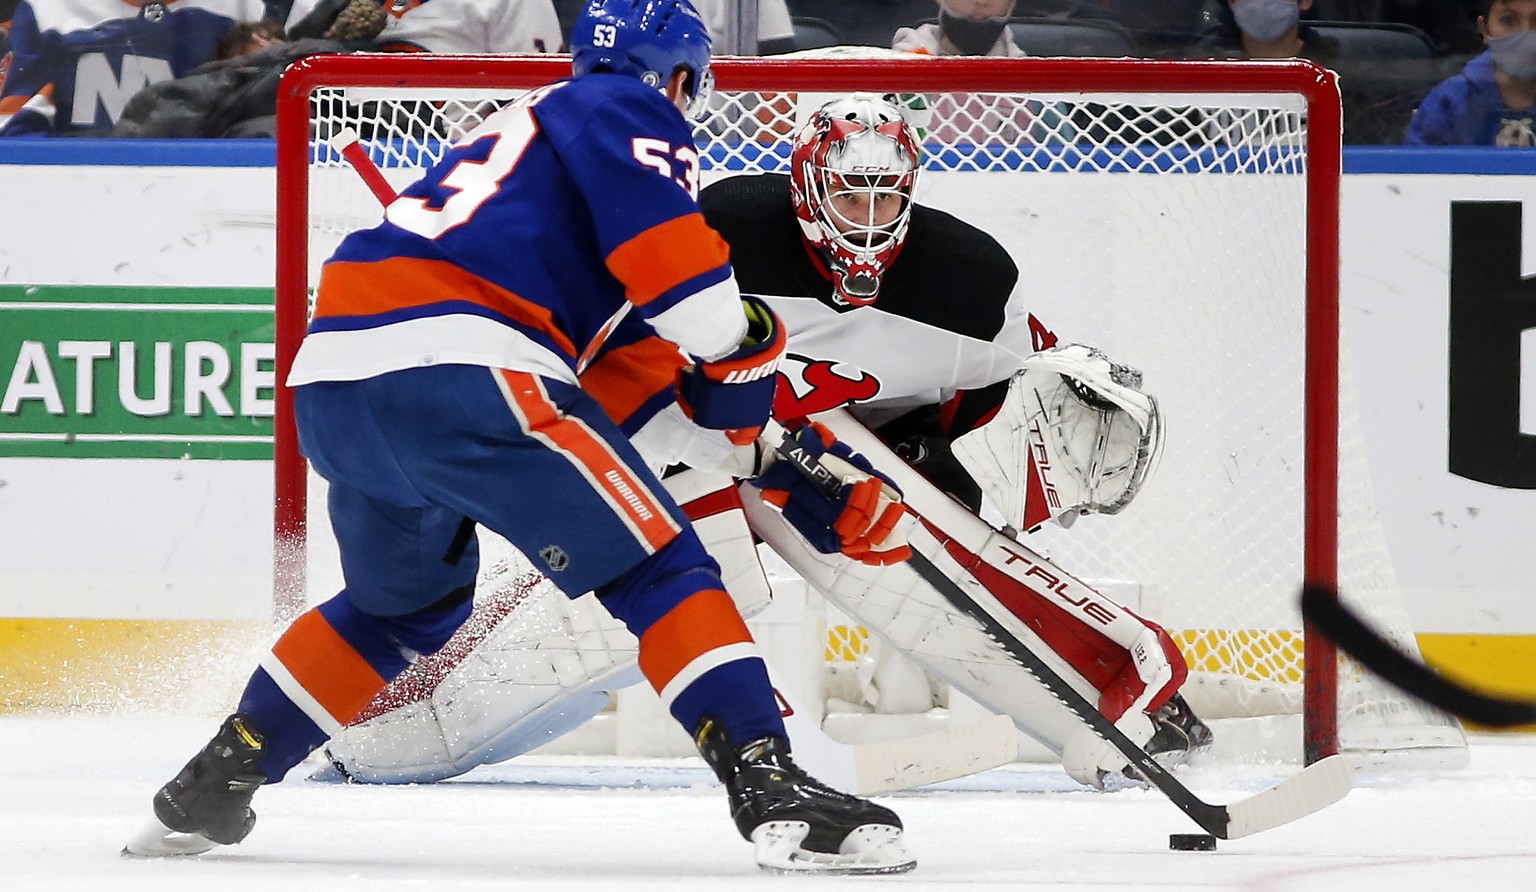 New Jersey Devils goaltender Akira Schmid (40) defends the net during the first period of an NHL hockey game against New York Islanders center Casey Cizikas (53) on Saturday, Dec. 11, 2021, in Elmont, ...